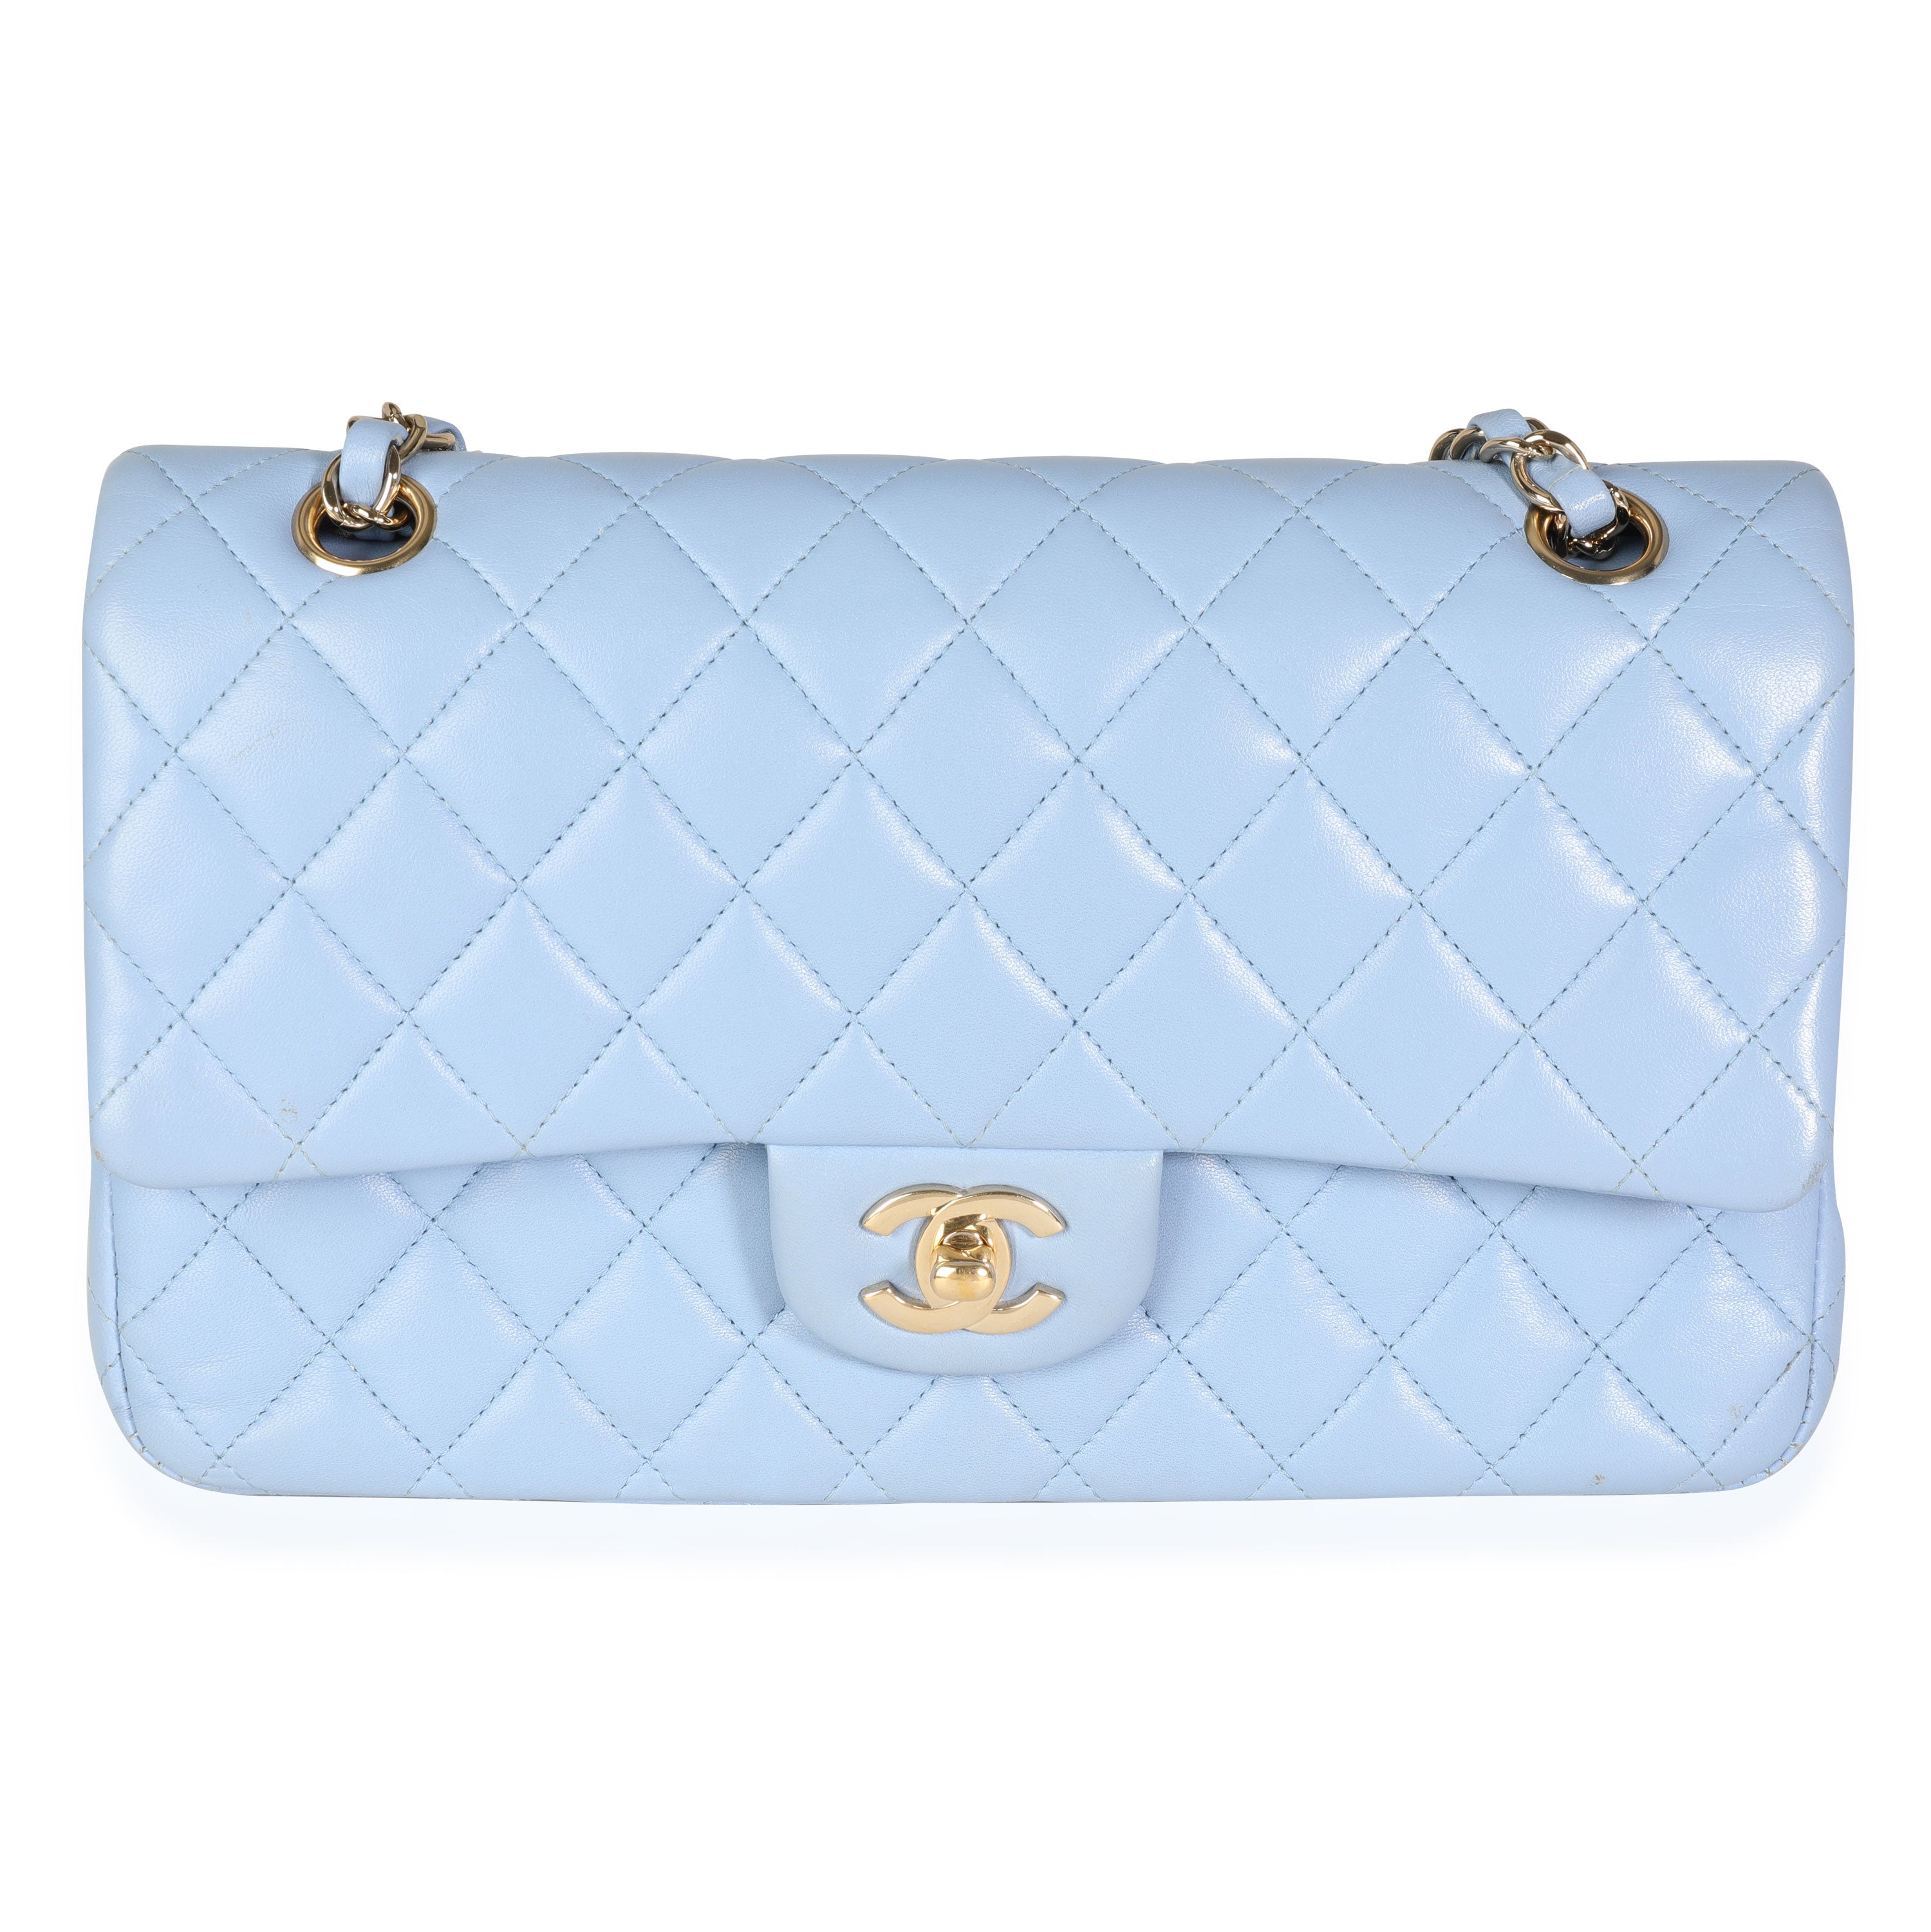 Chanel Periwinkle Quilted Lambskin Medium Classic Double Flap